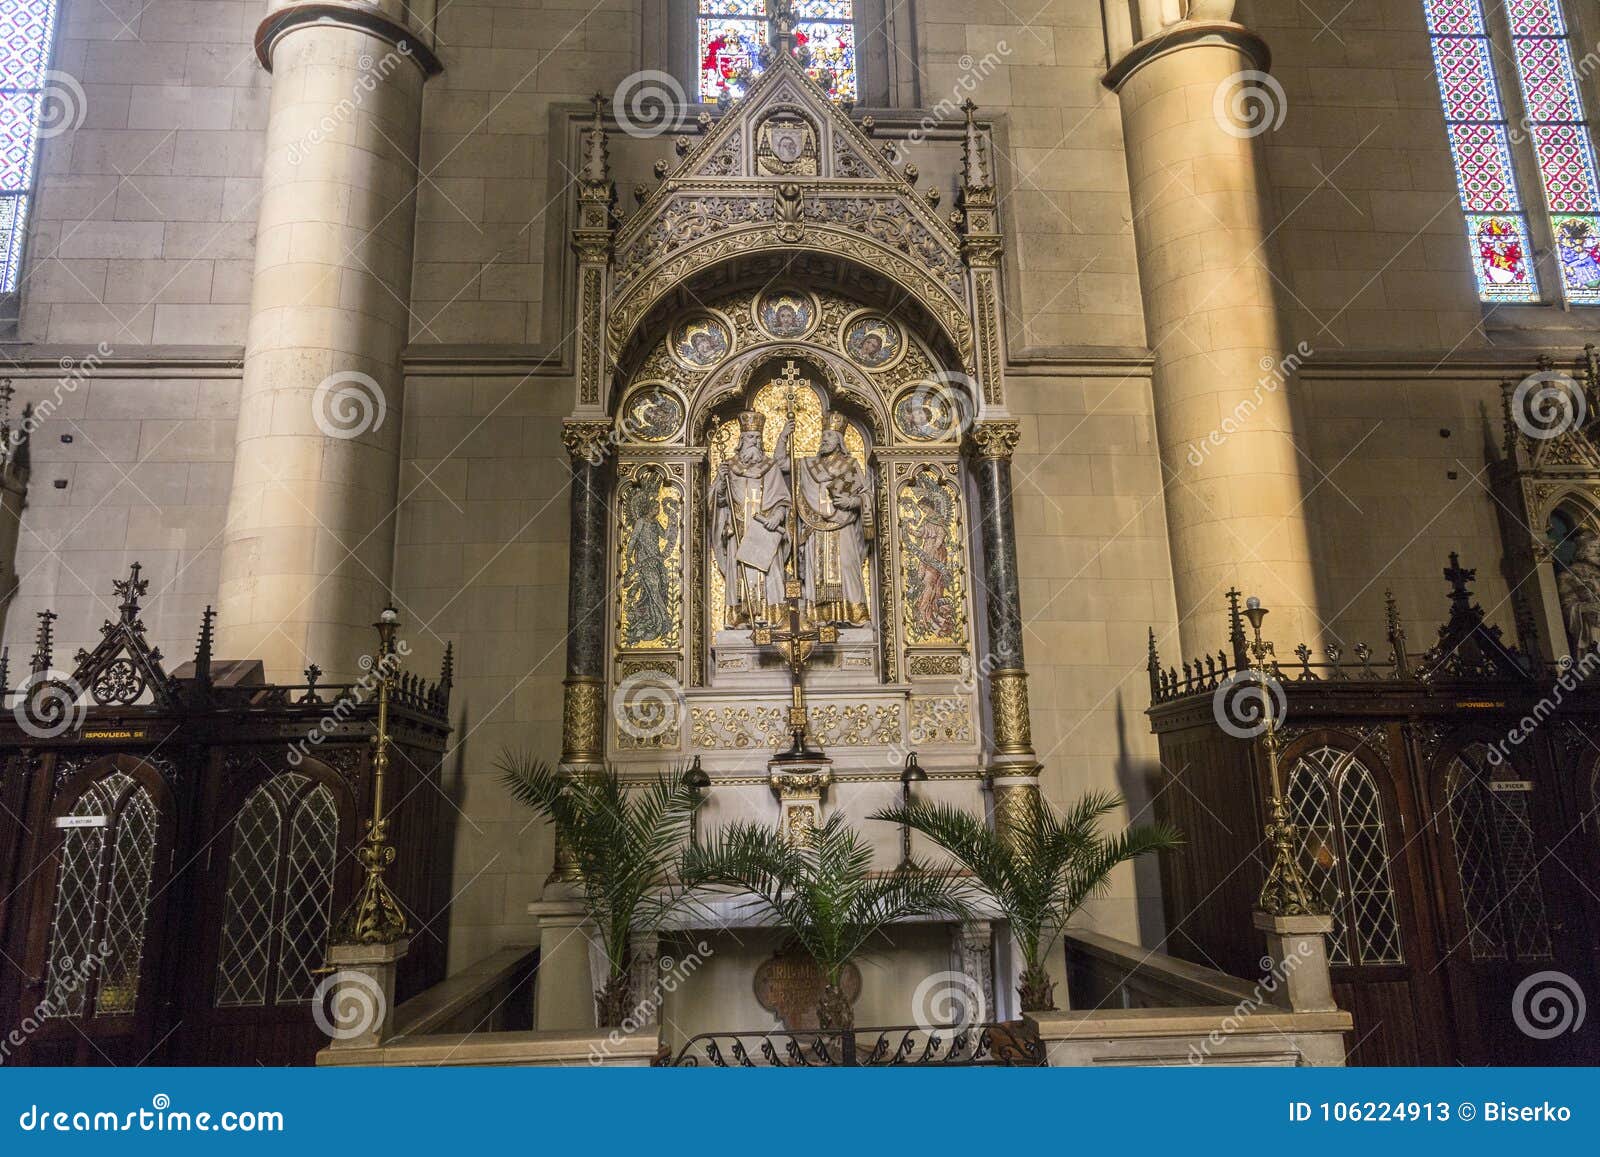 triple navigation overflow Gothic Church Interior Decoration Stock Image - Image of column, martyr:  106224913